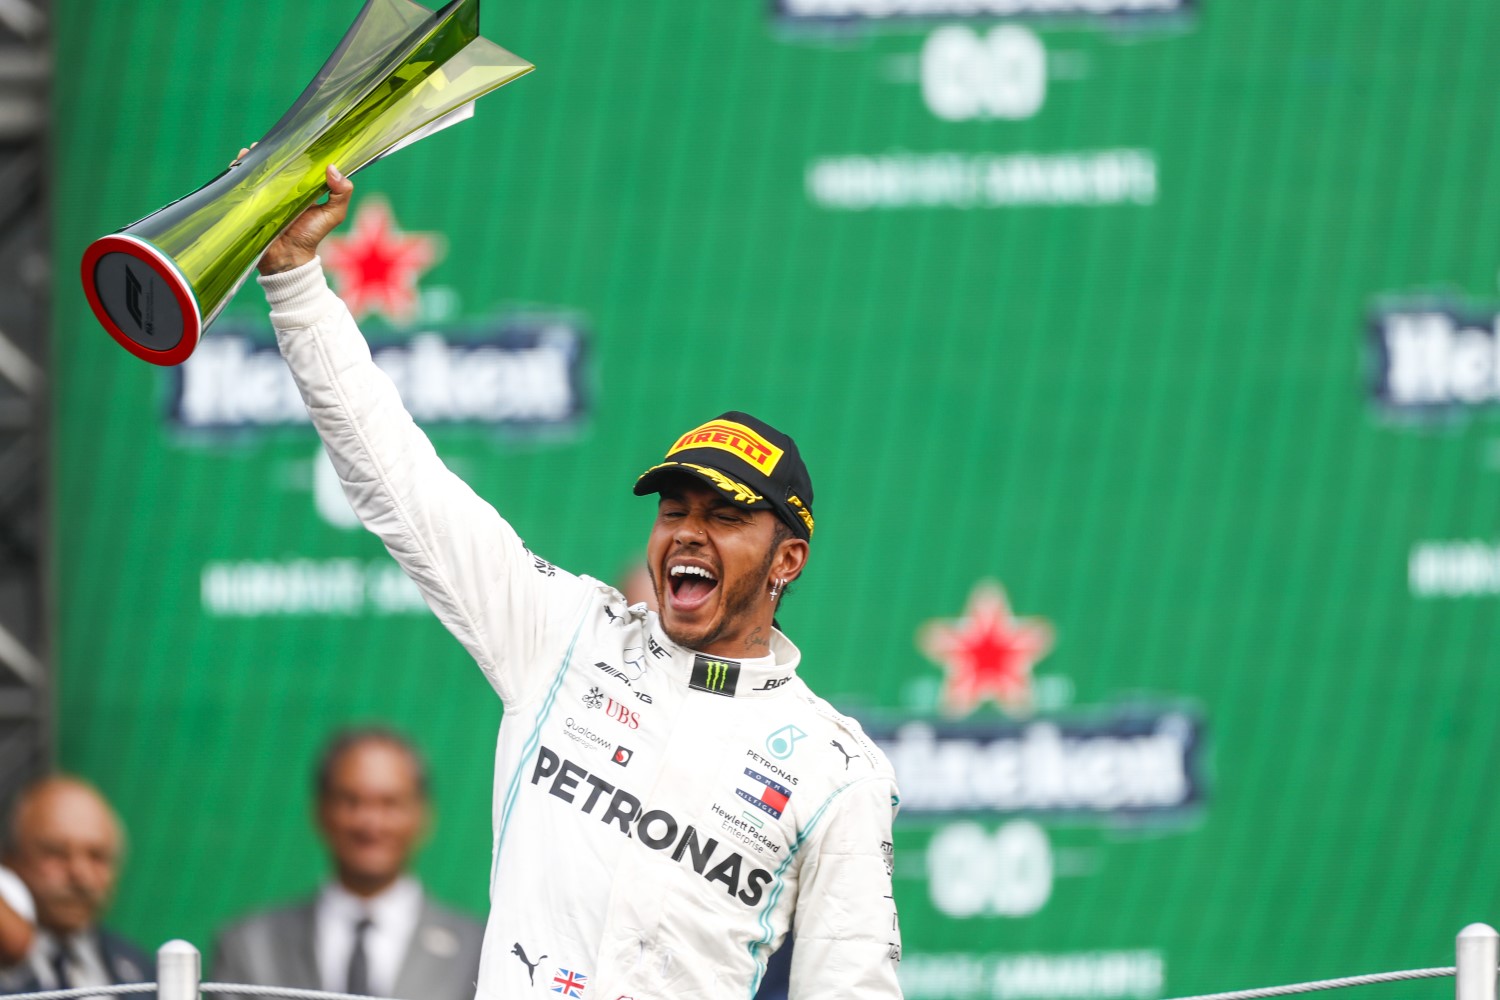 Hamilton will break all of Schumacher's records by staying with Mercedes